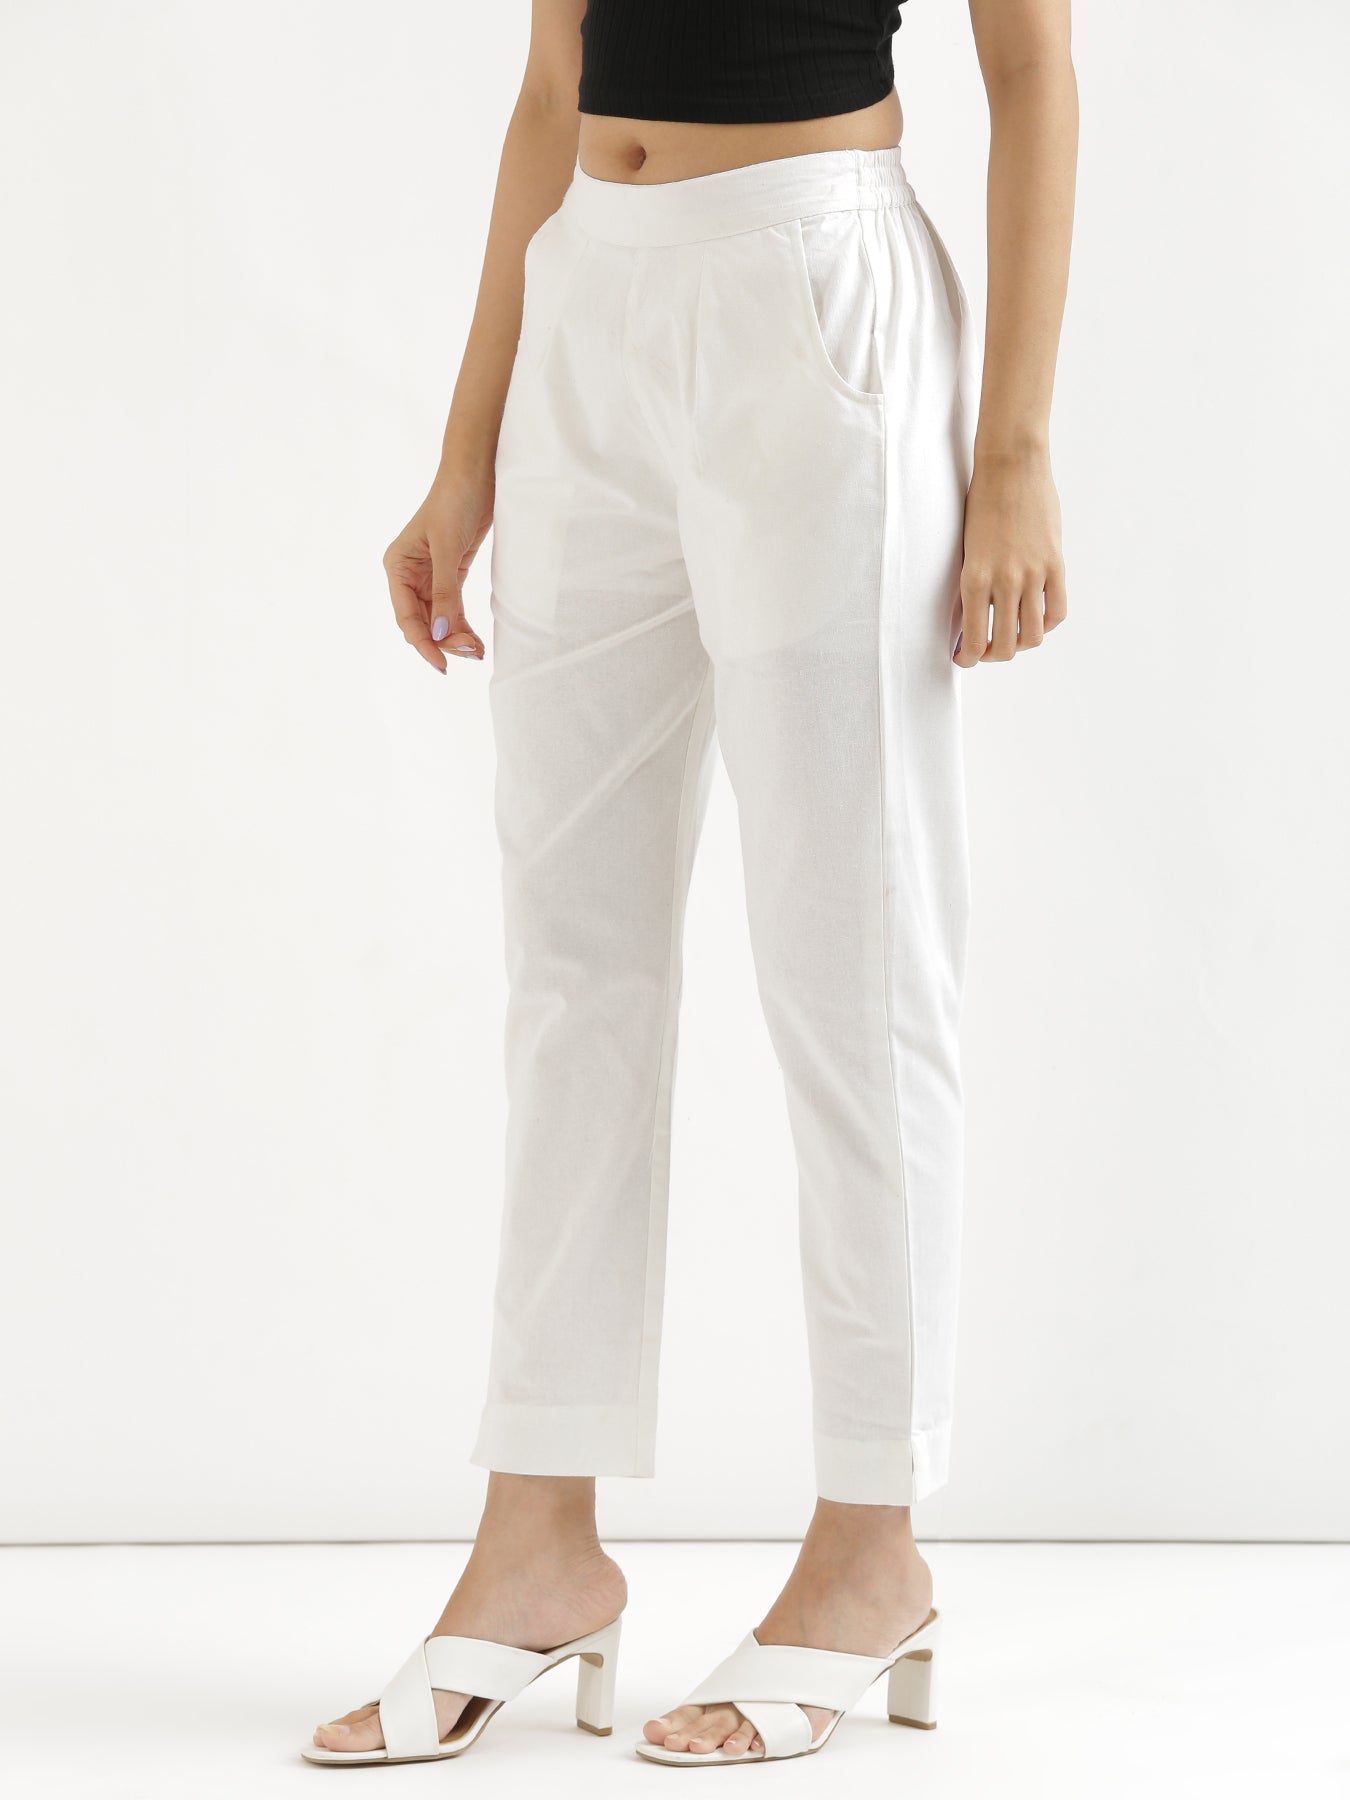 White Cotton Trouser For Women, Solid Regular Fit